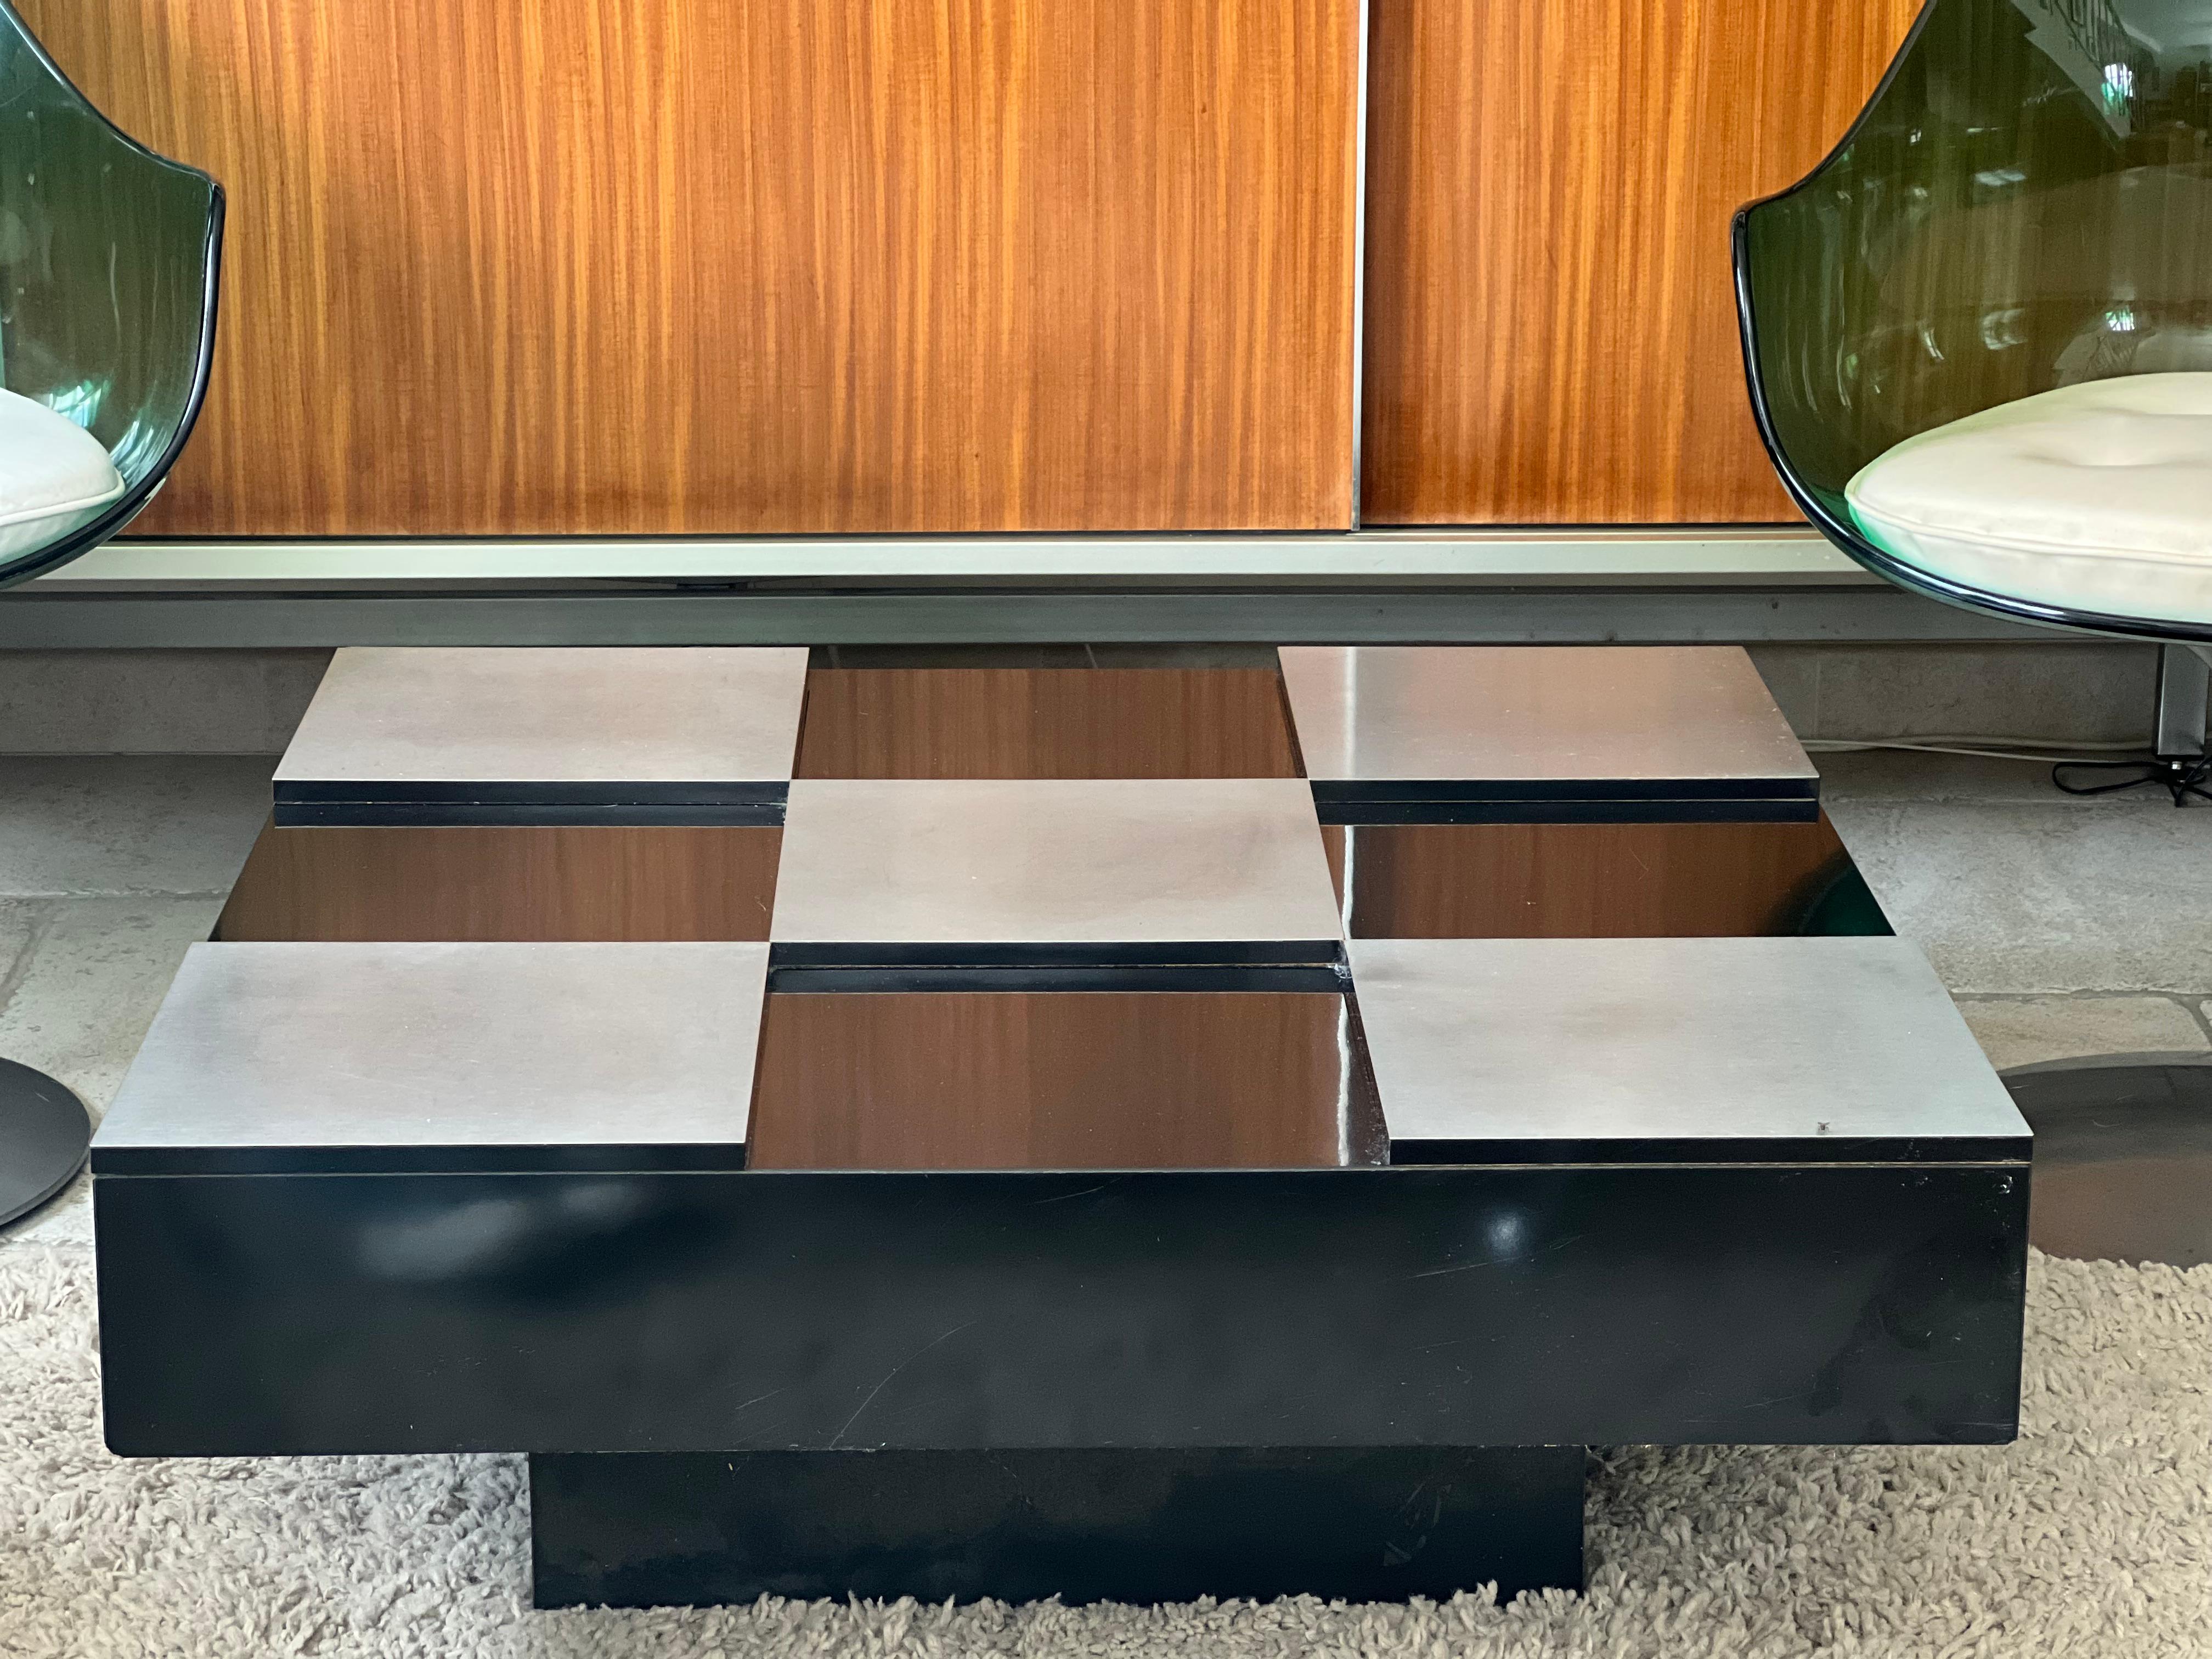 Space Age Italian Design, Black Lacquer and Brushed Steel Coffee Table Willy Rizzo 1970 For Sale